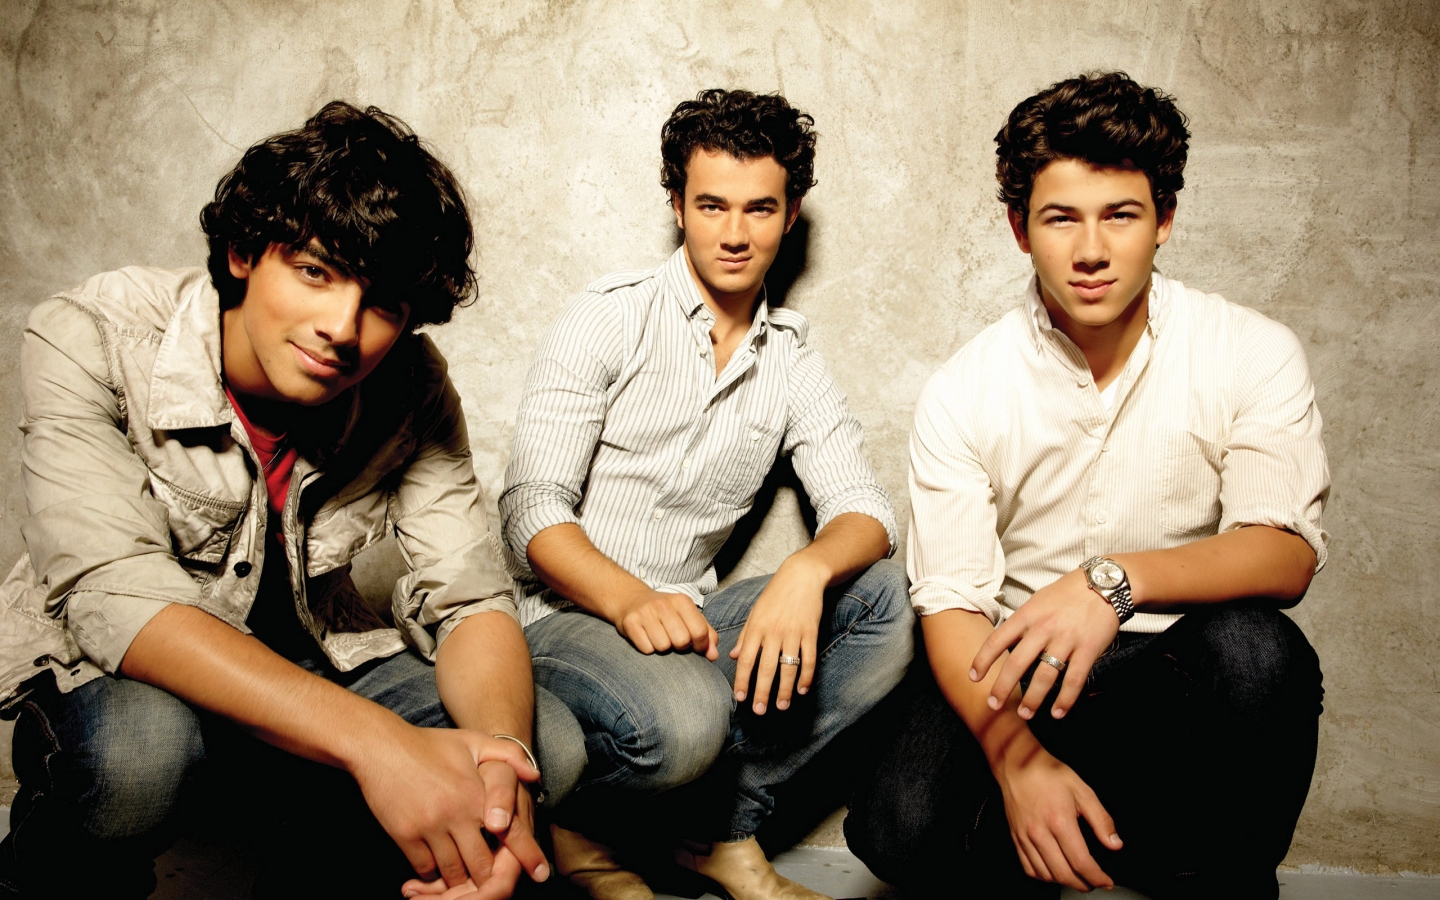 Cool Jonas Brothers for 1440 x 900 widescreen resolution